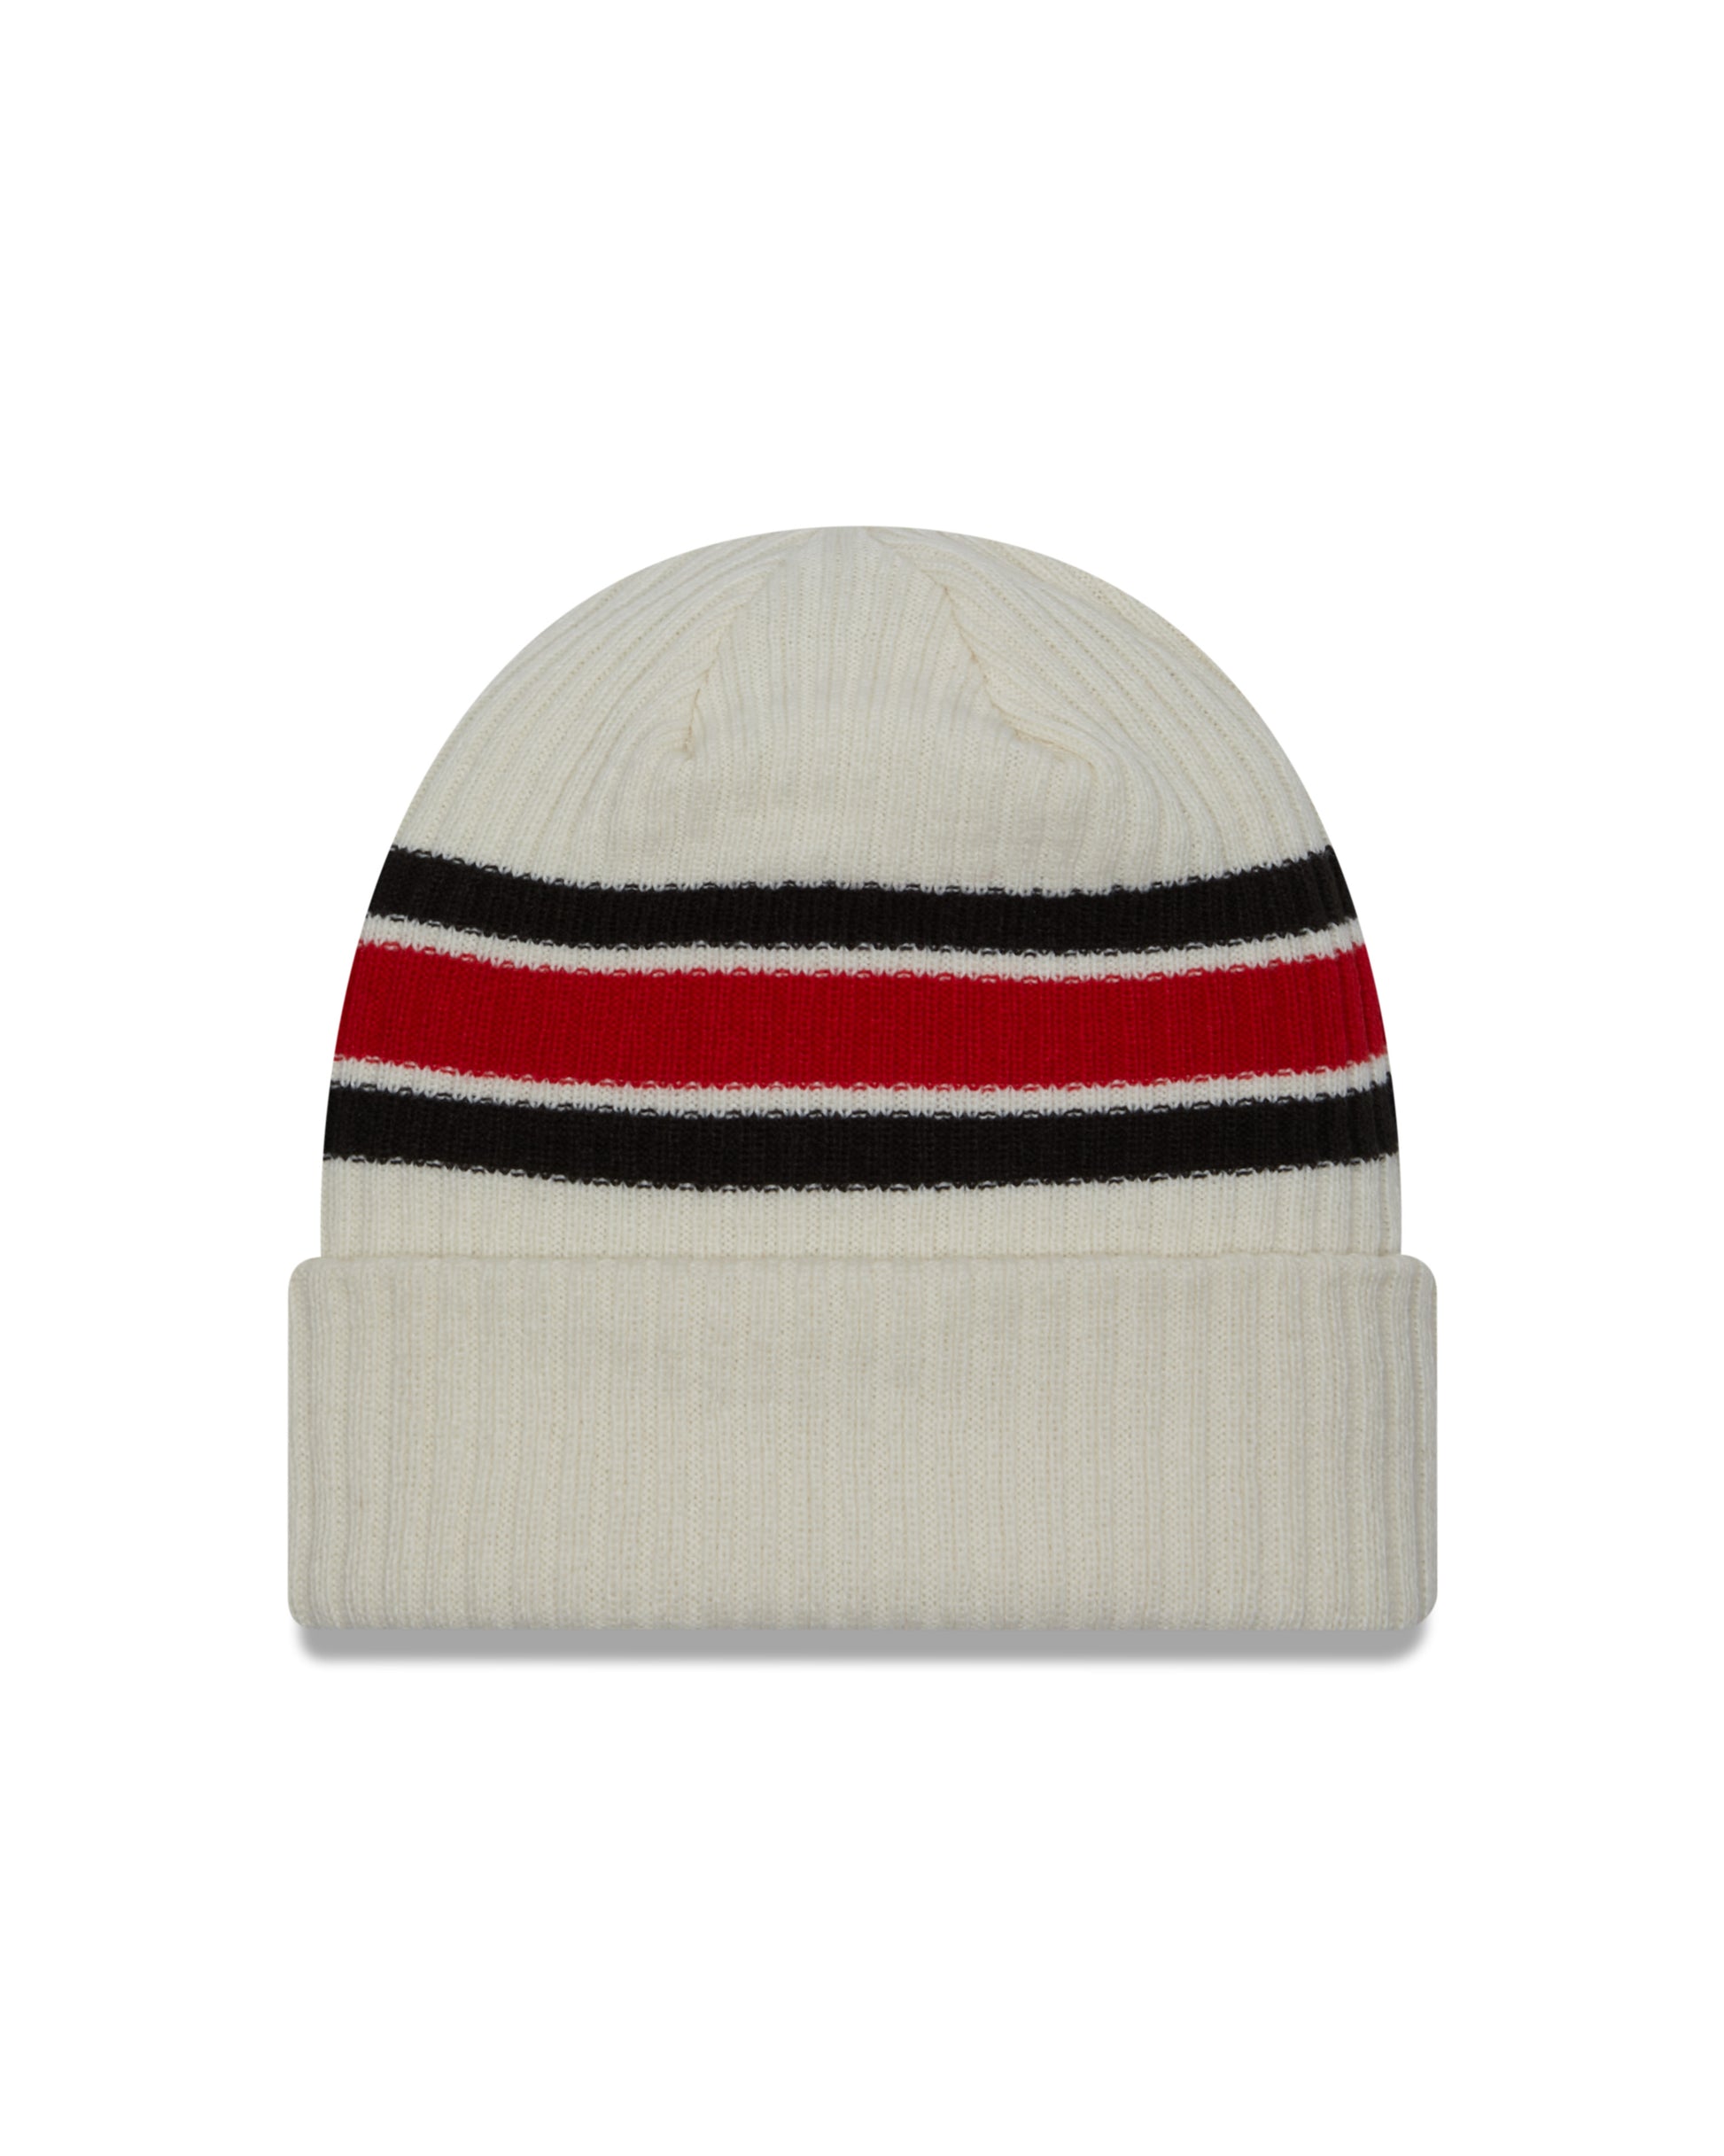 Back: White cuffed beanie with black and red striping